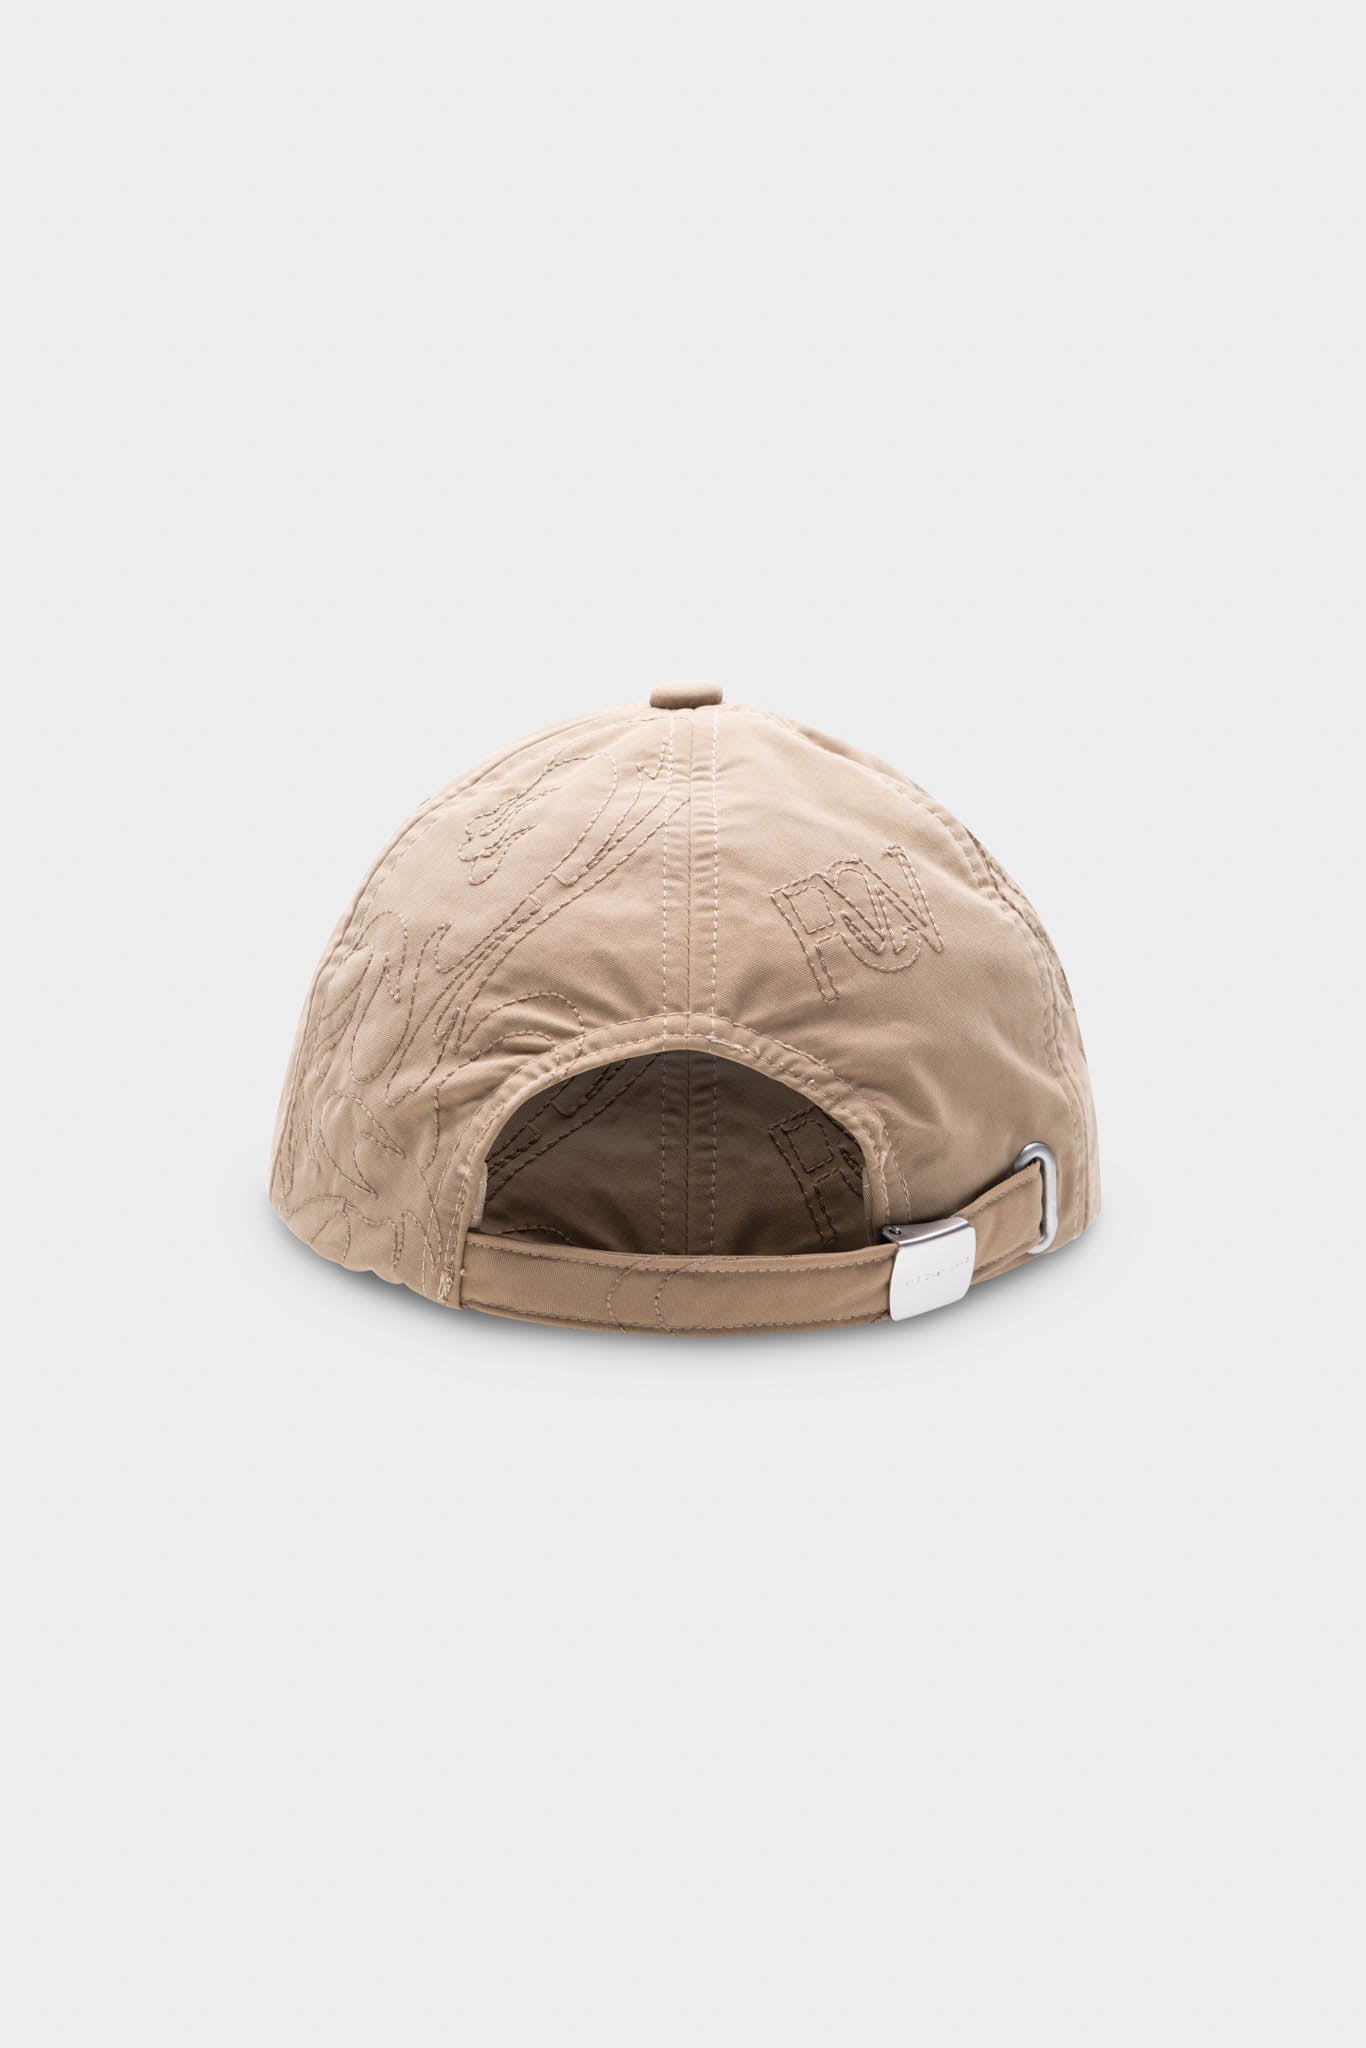 Selectshop FRAME - FENG CHEN WANG Quilted Cap All-Accessories Dubai